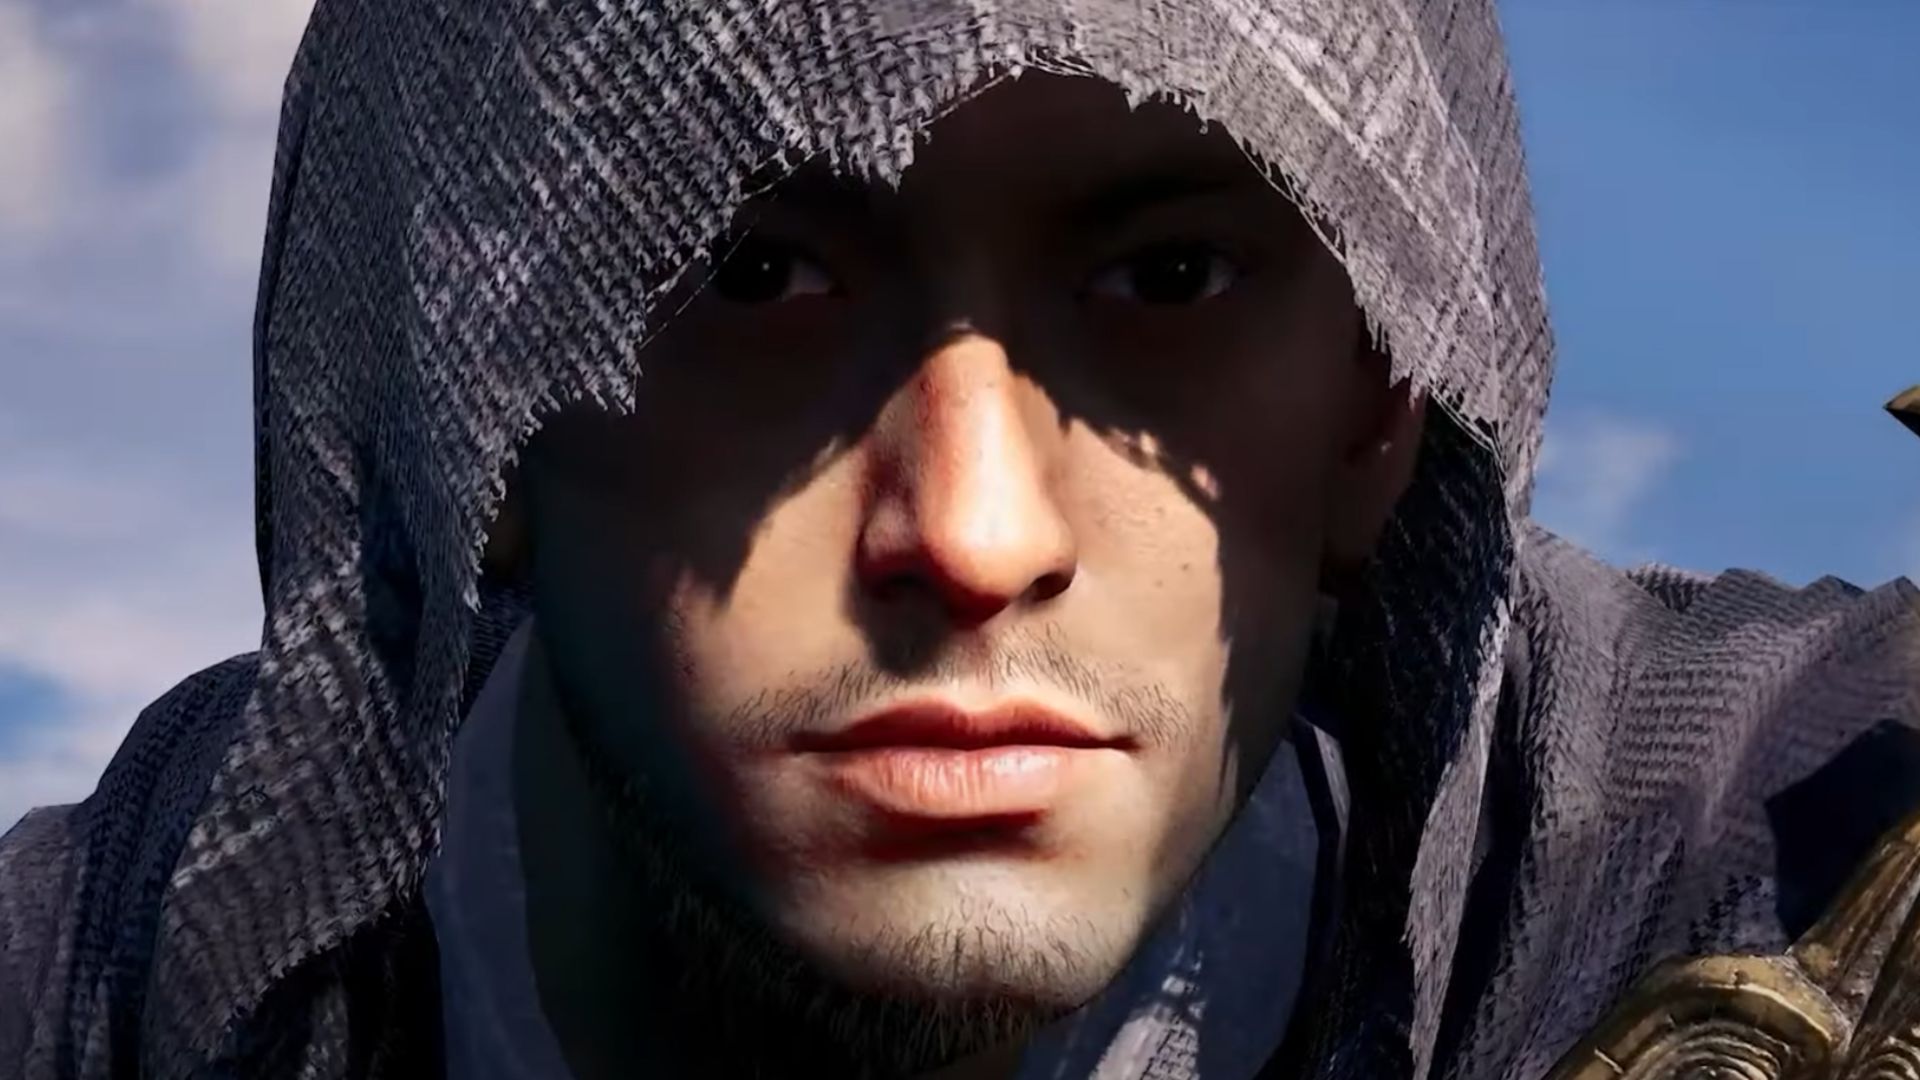 Open-world Assassin's Creed mobile game in development | Pocket Tactics